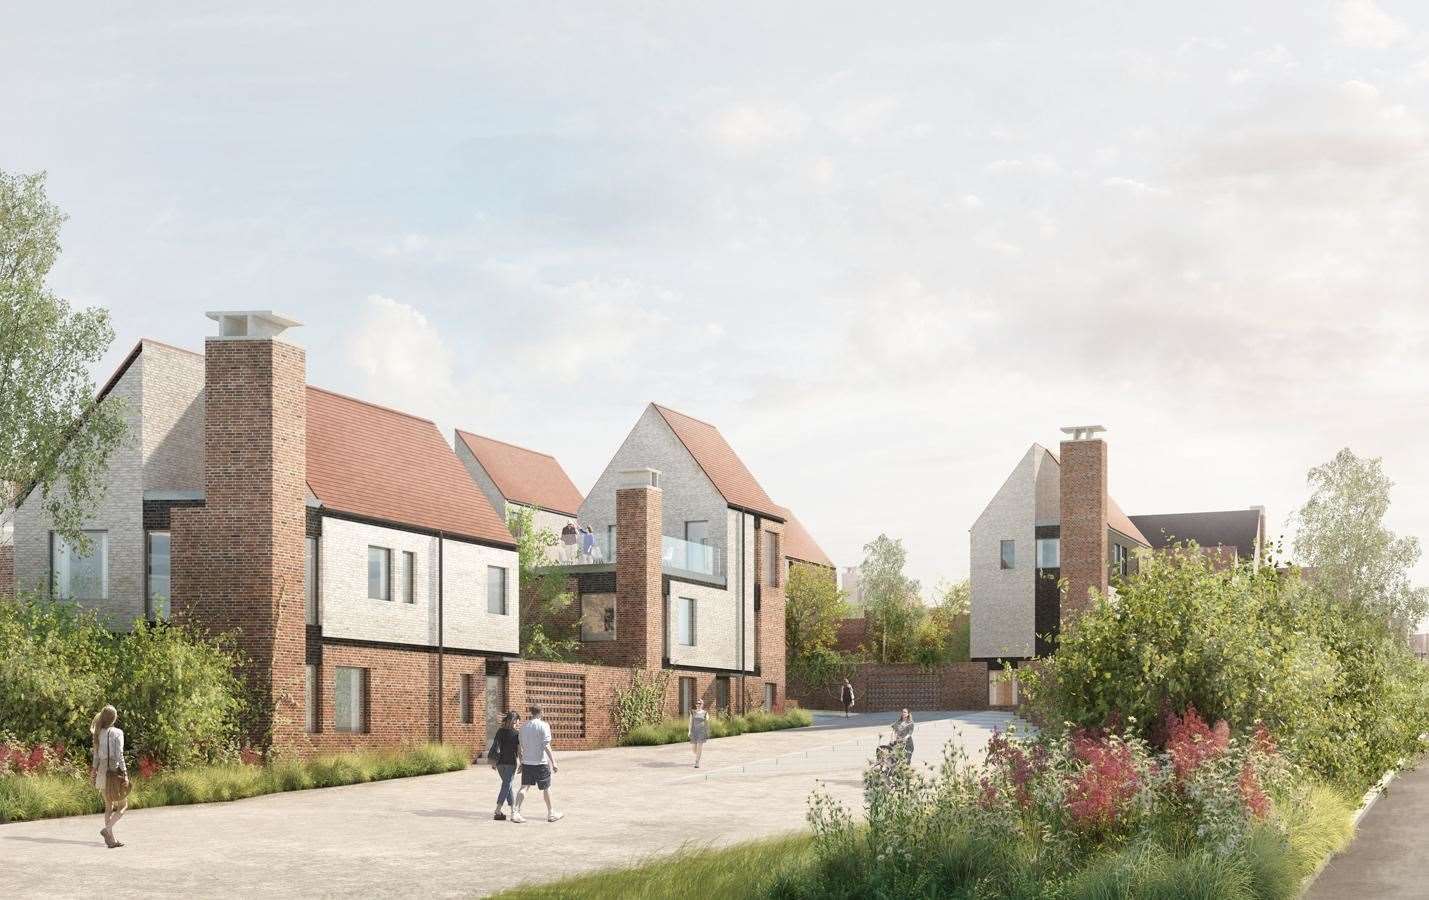 How the Mountfield Park scheme is expected to look